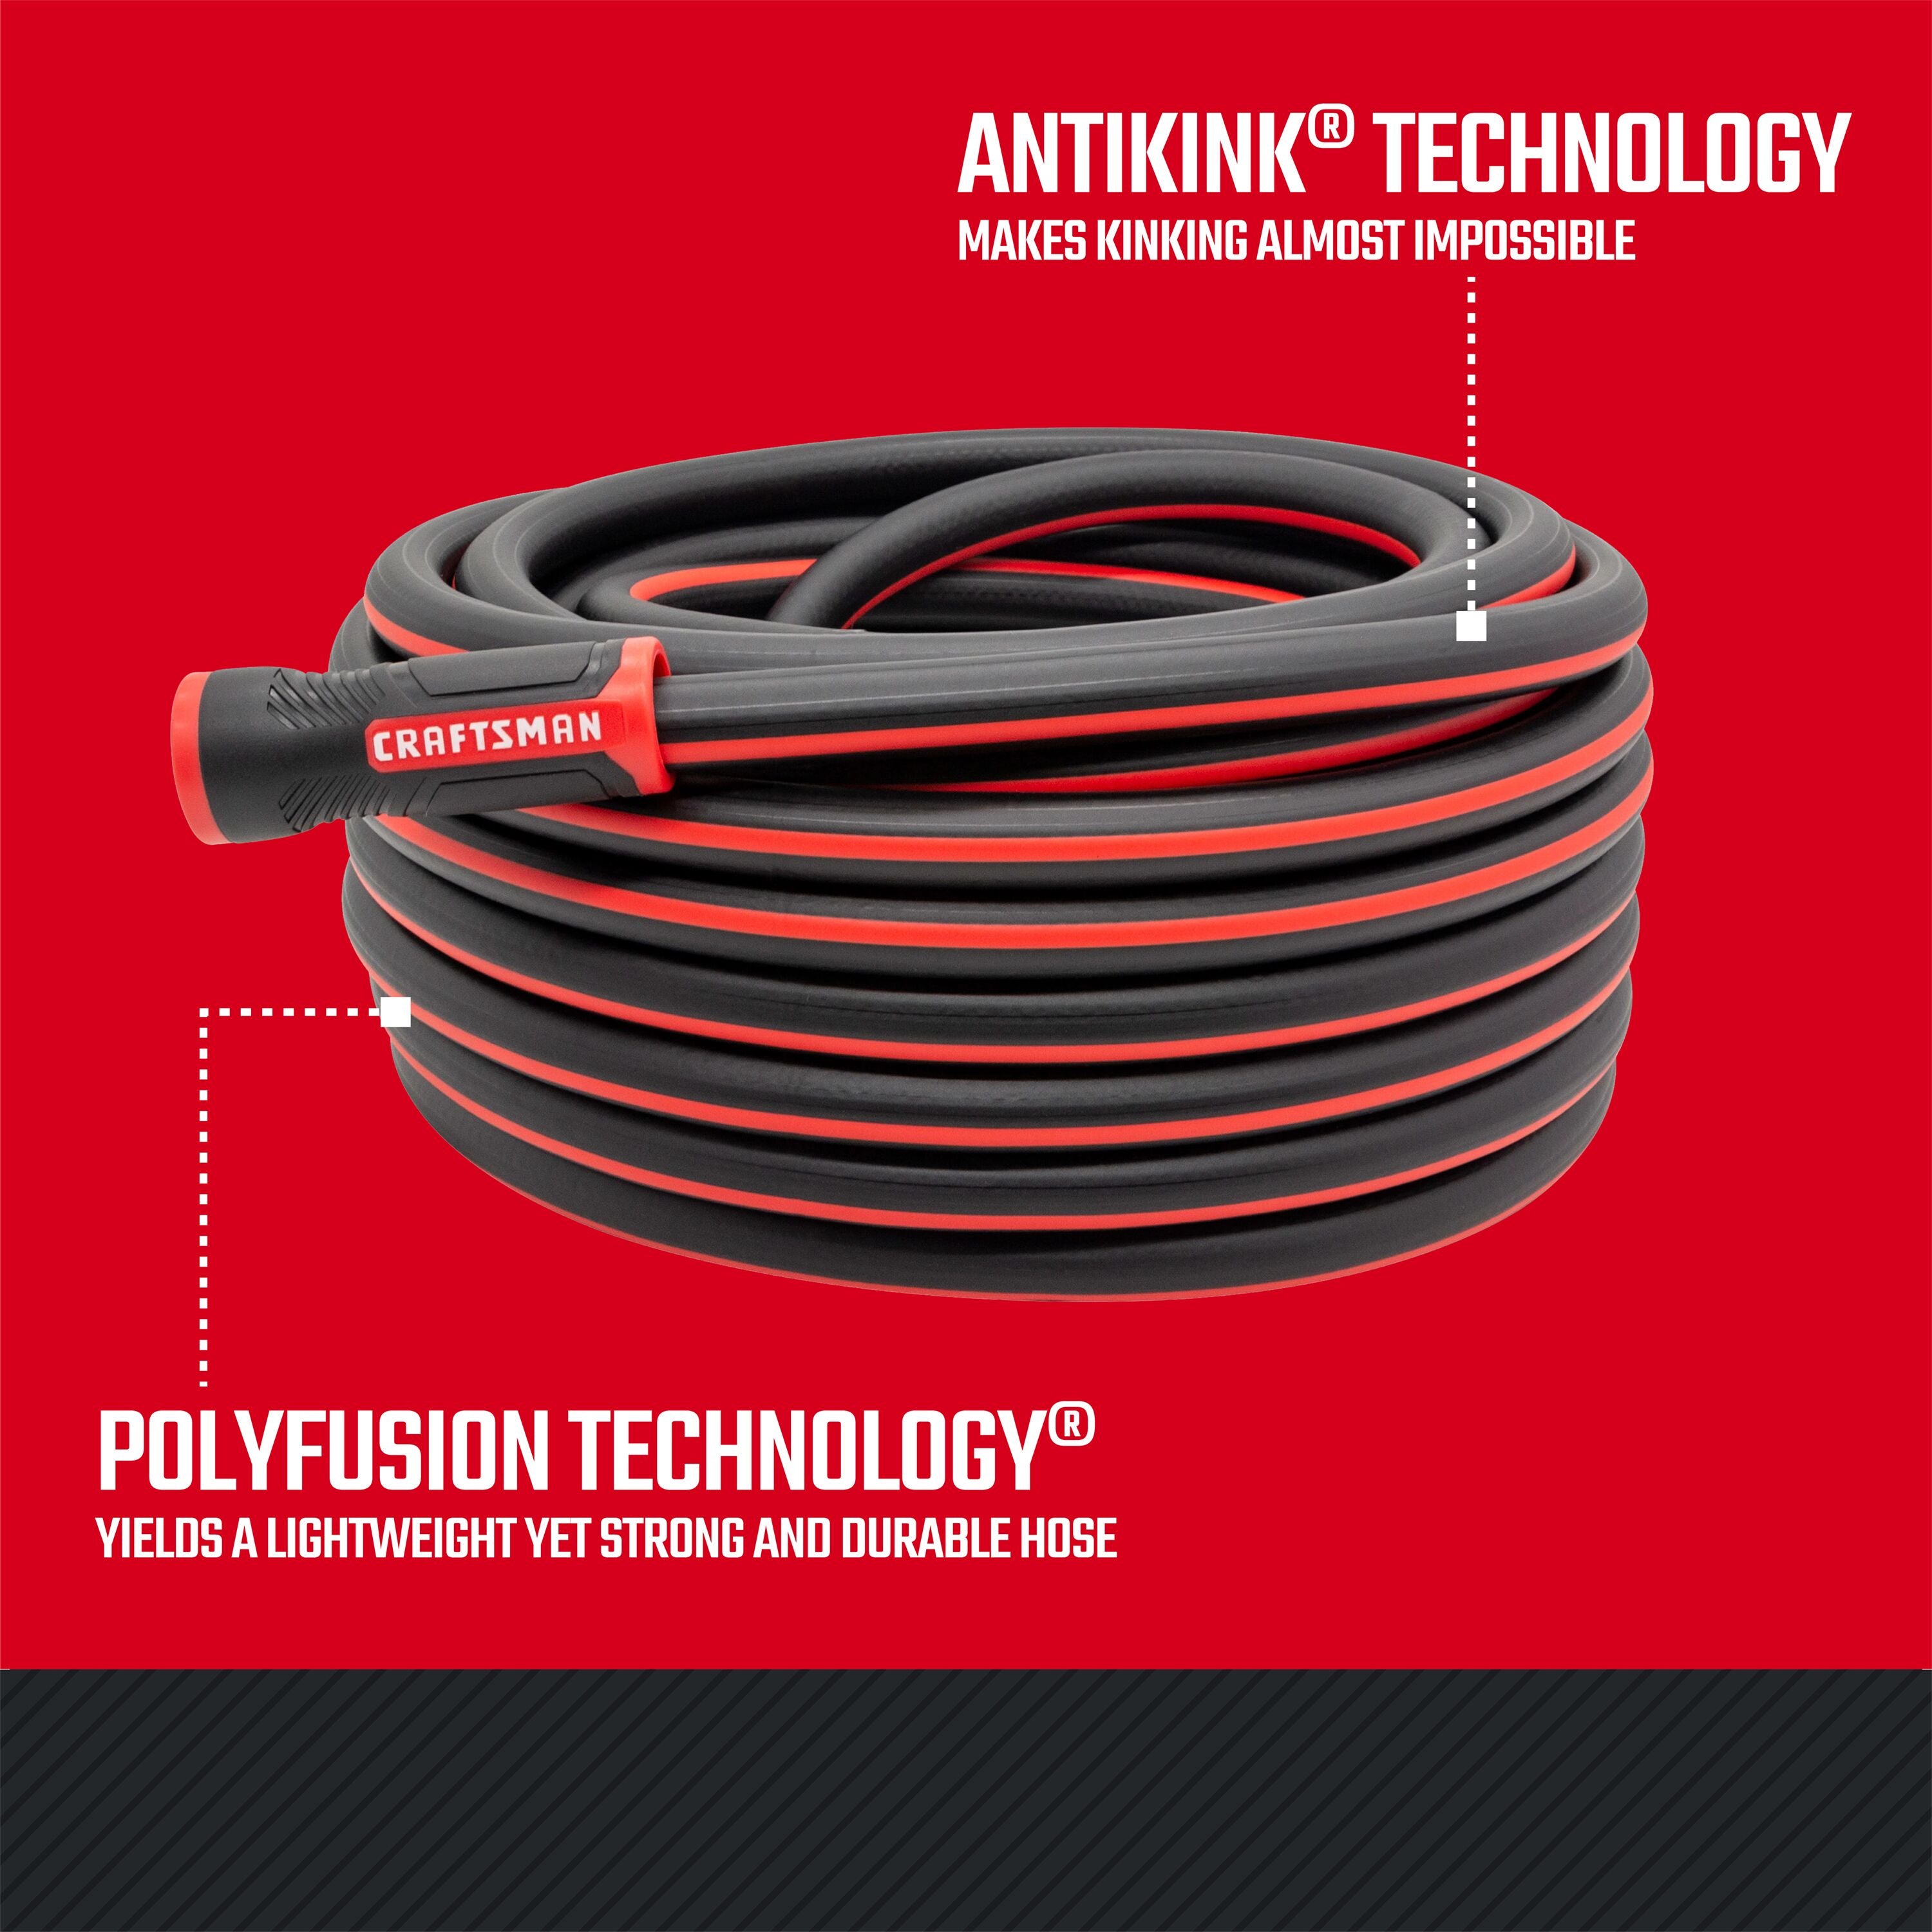 Black and red coiled craftsman professional-grade water hose, 50-foot by 5/8 inch. Featuring antikink and polyfusion technology graphic